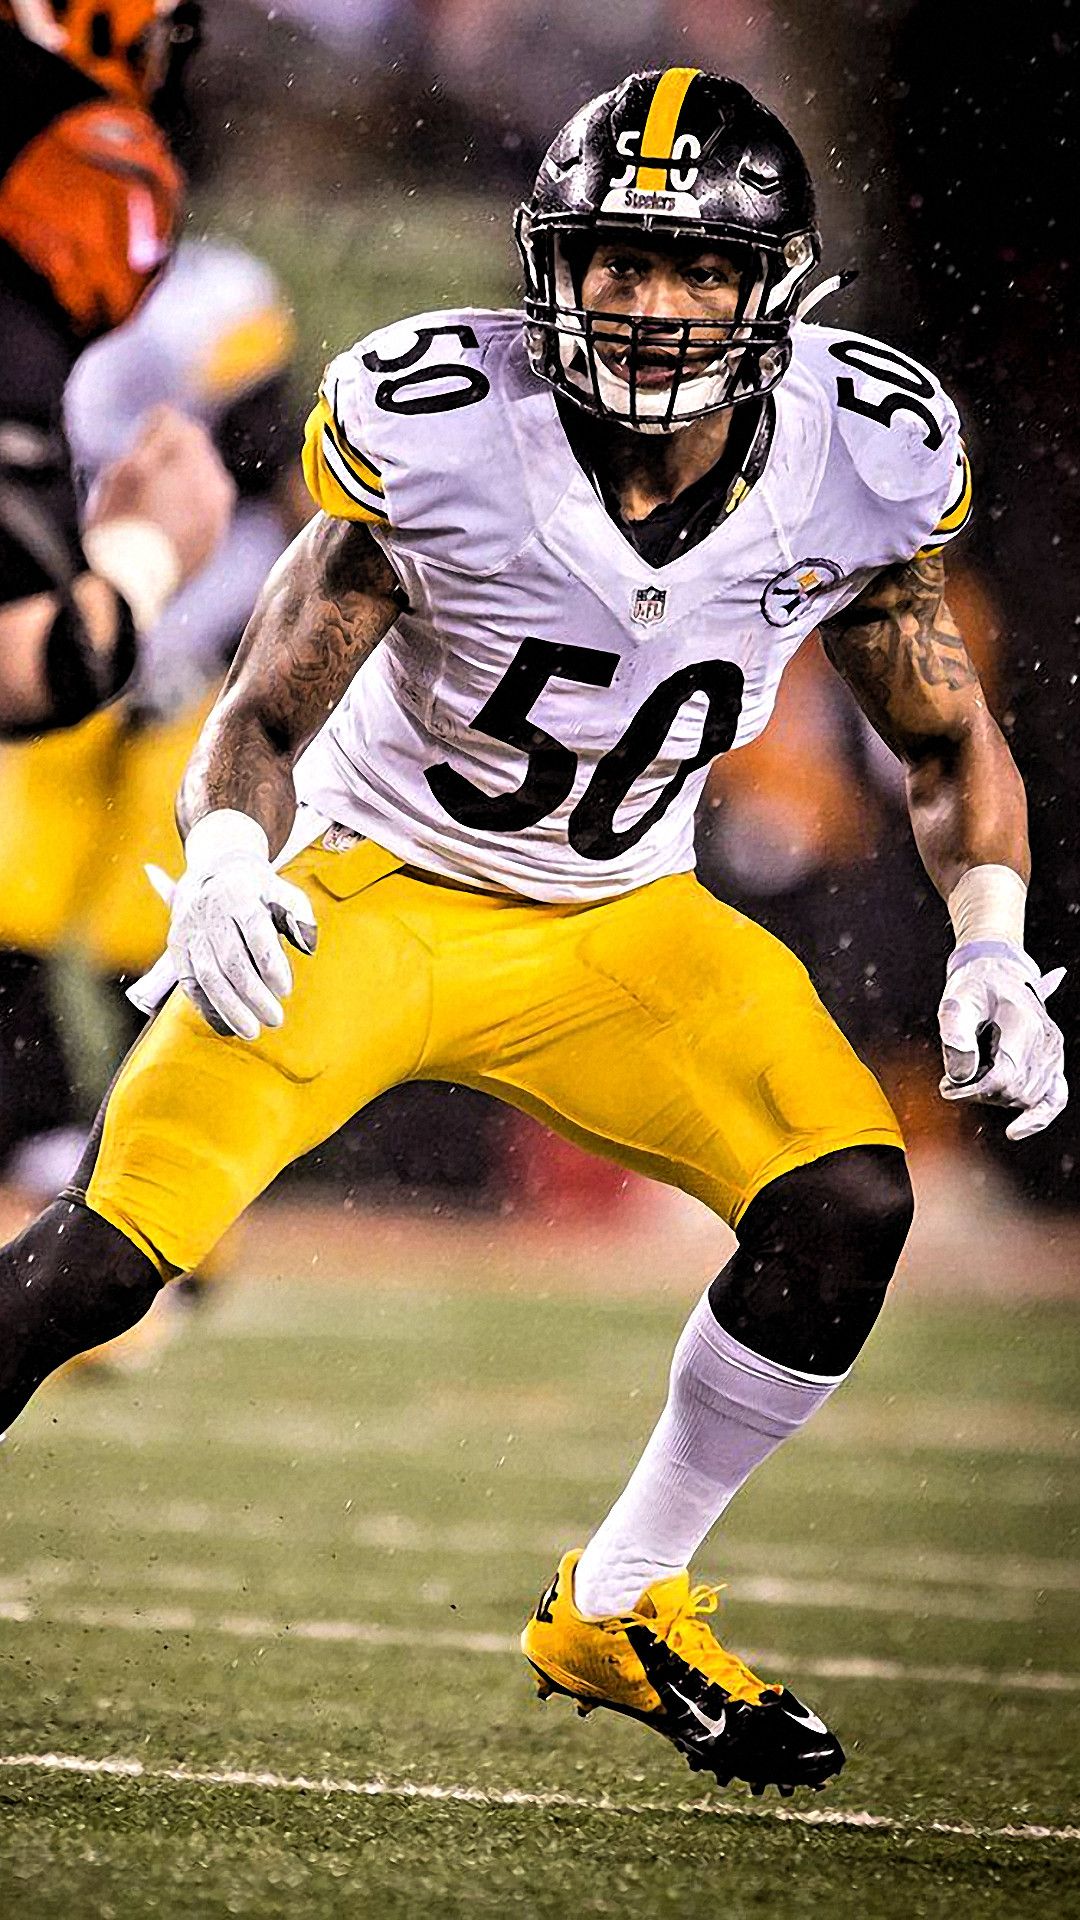 New Steelers Wallpaper for iPhone